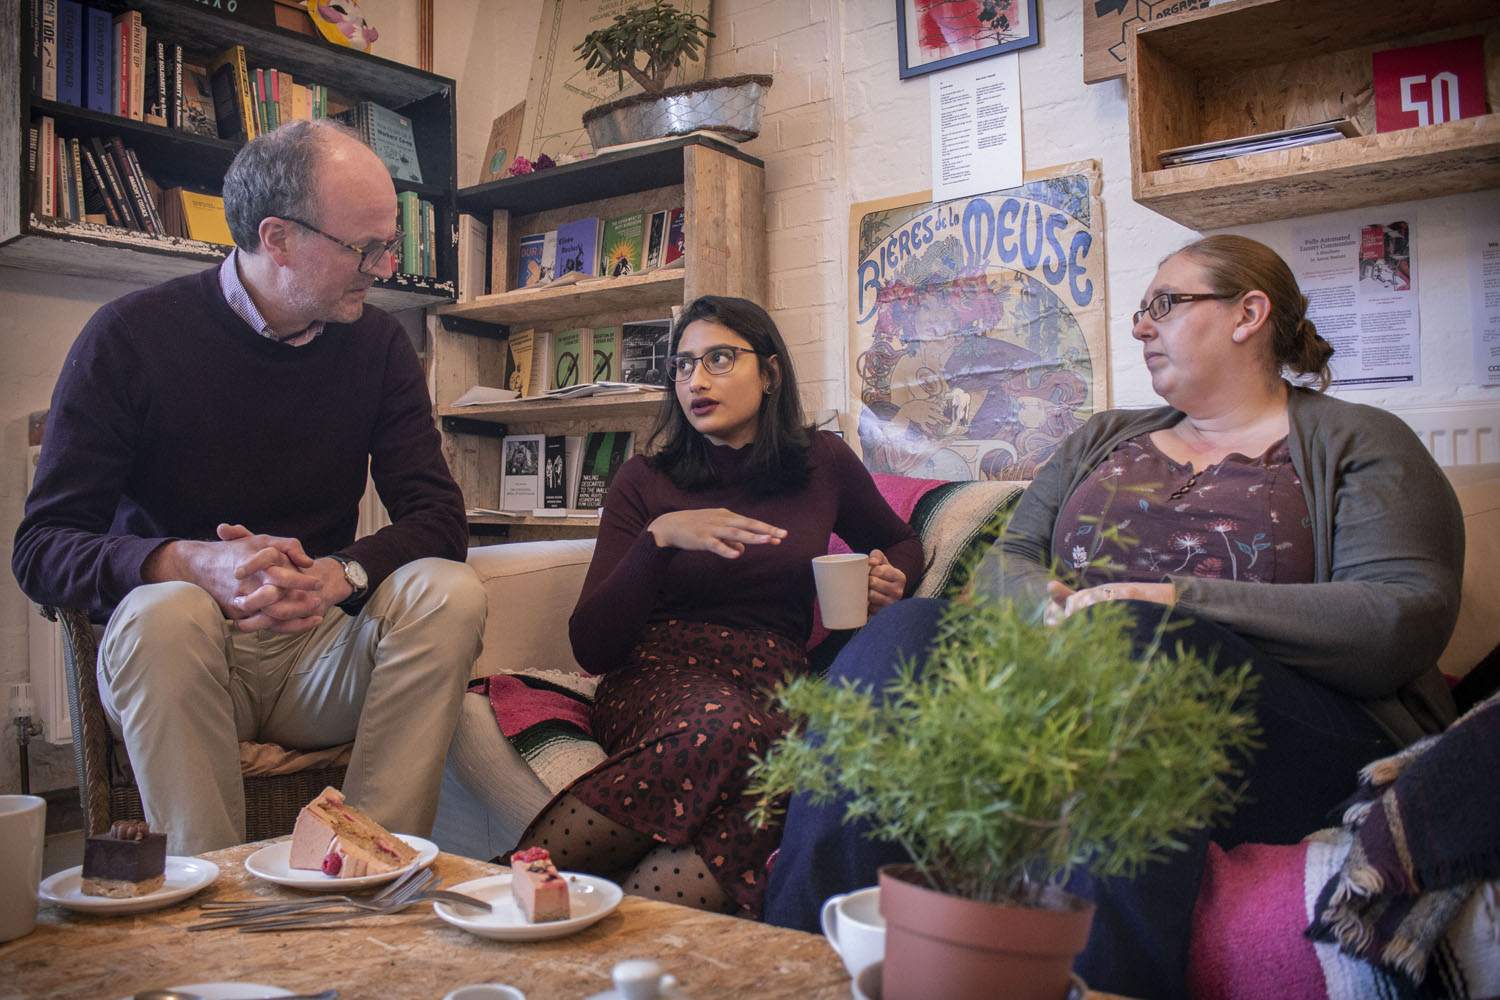 Shamima speaking to academics in a coffee shop